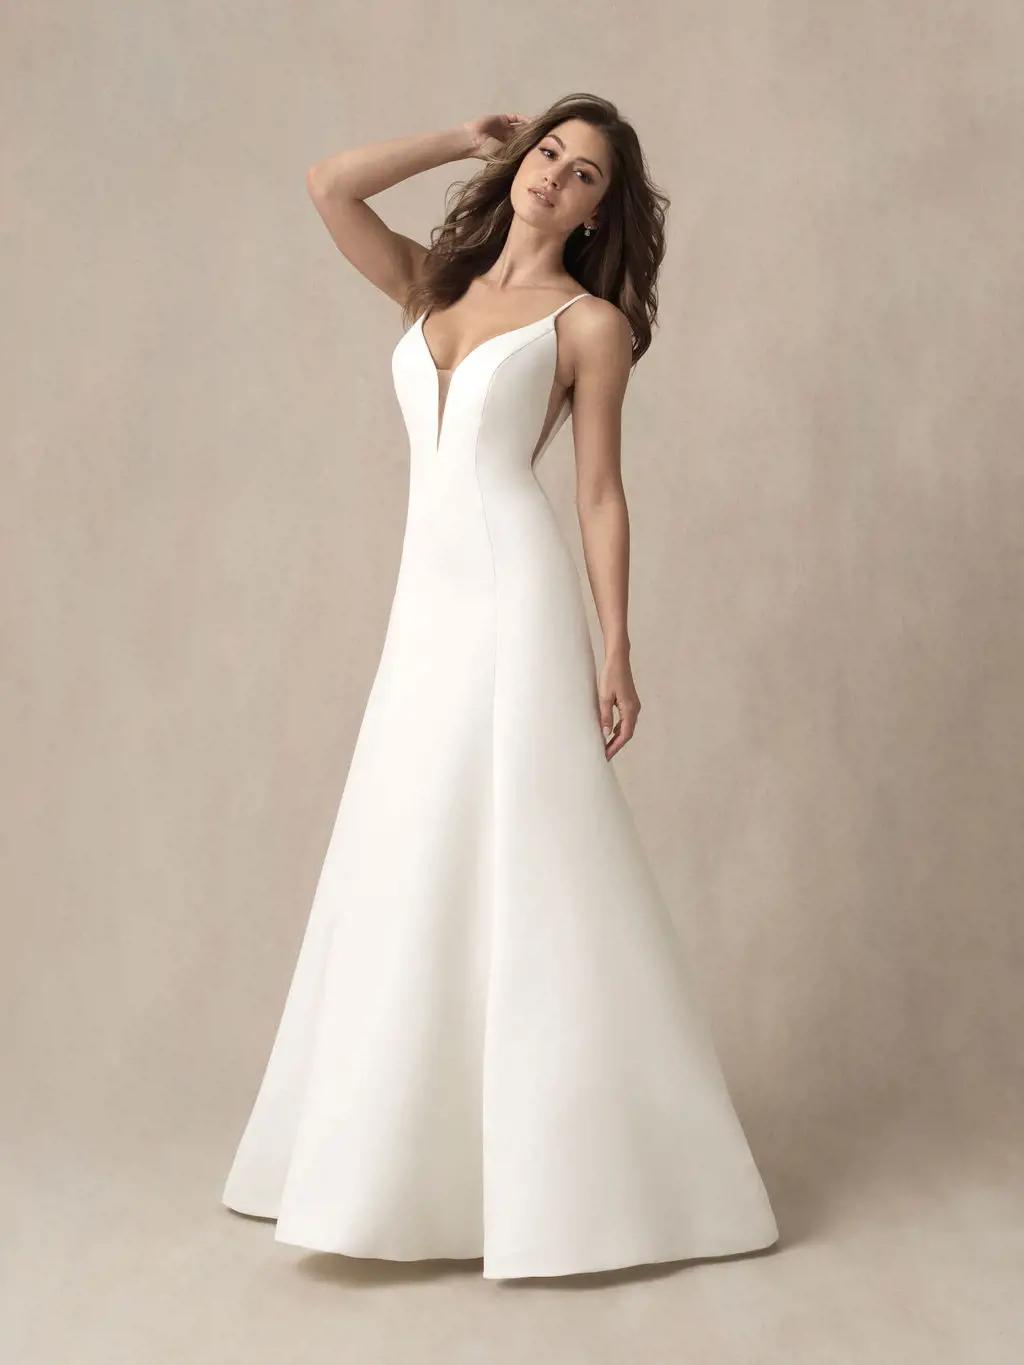 In Search of One of the Best Wedding Dress Shops in San Diego? This is the One!. Desktop Image